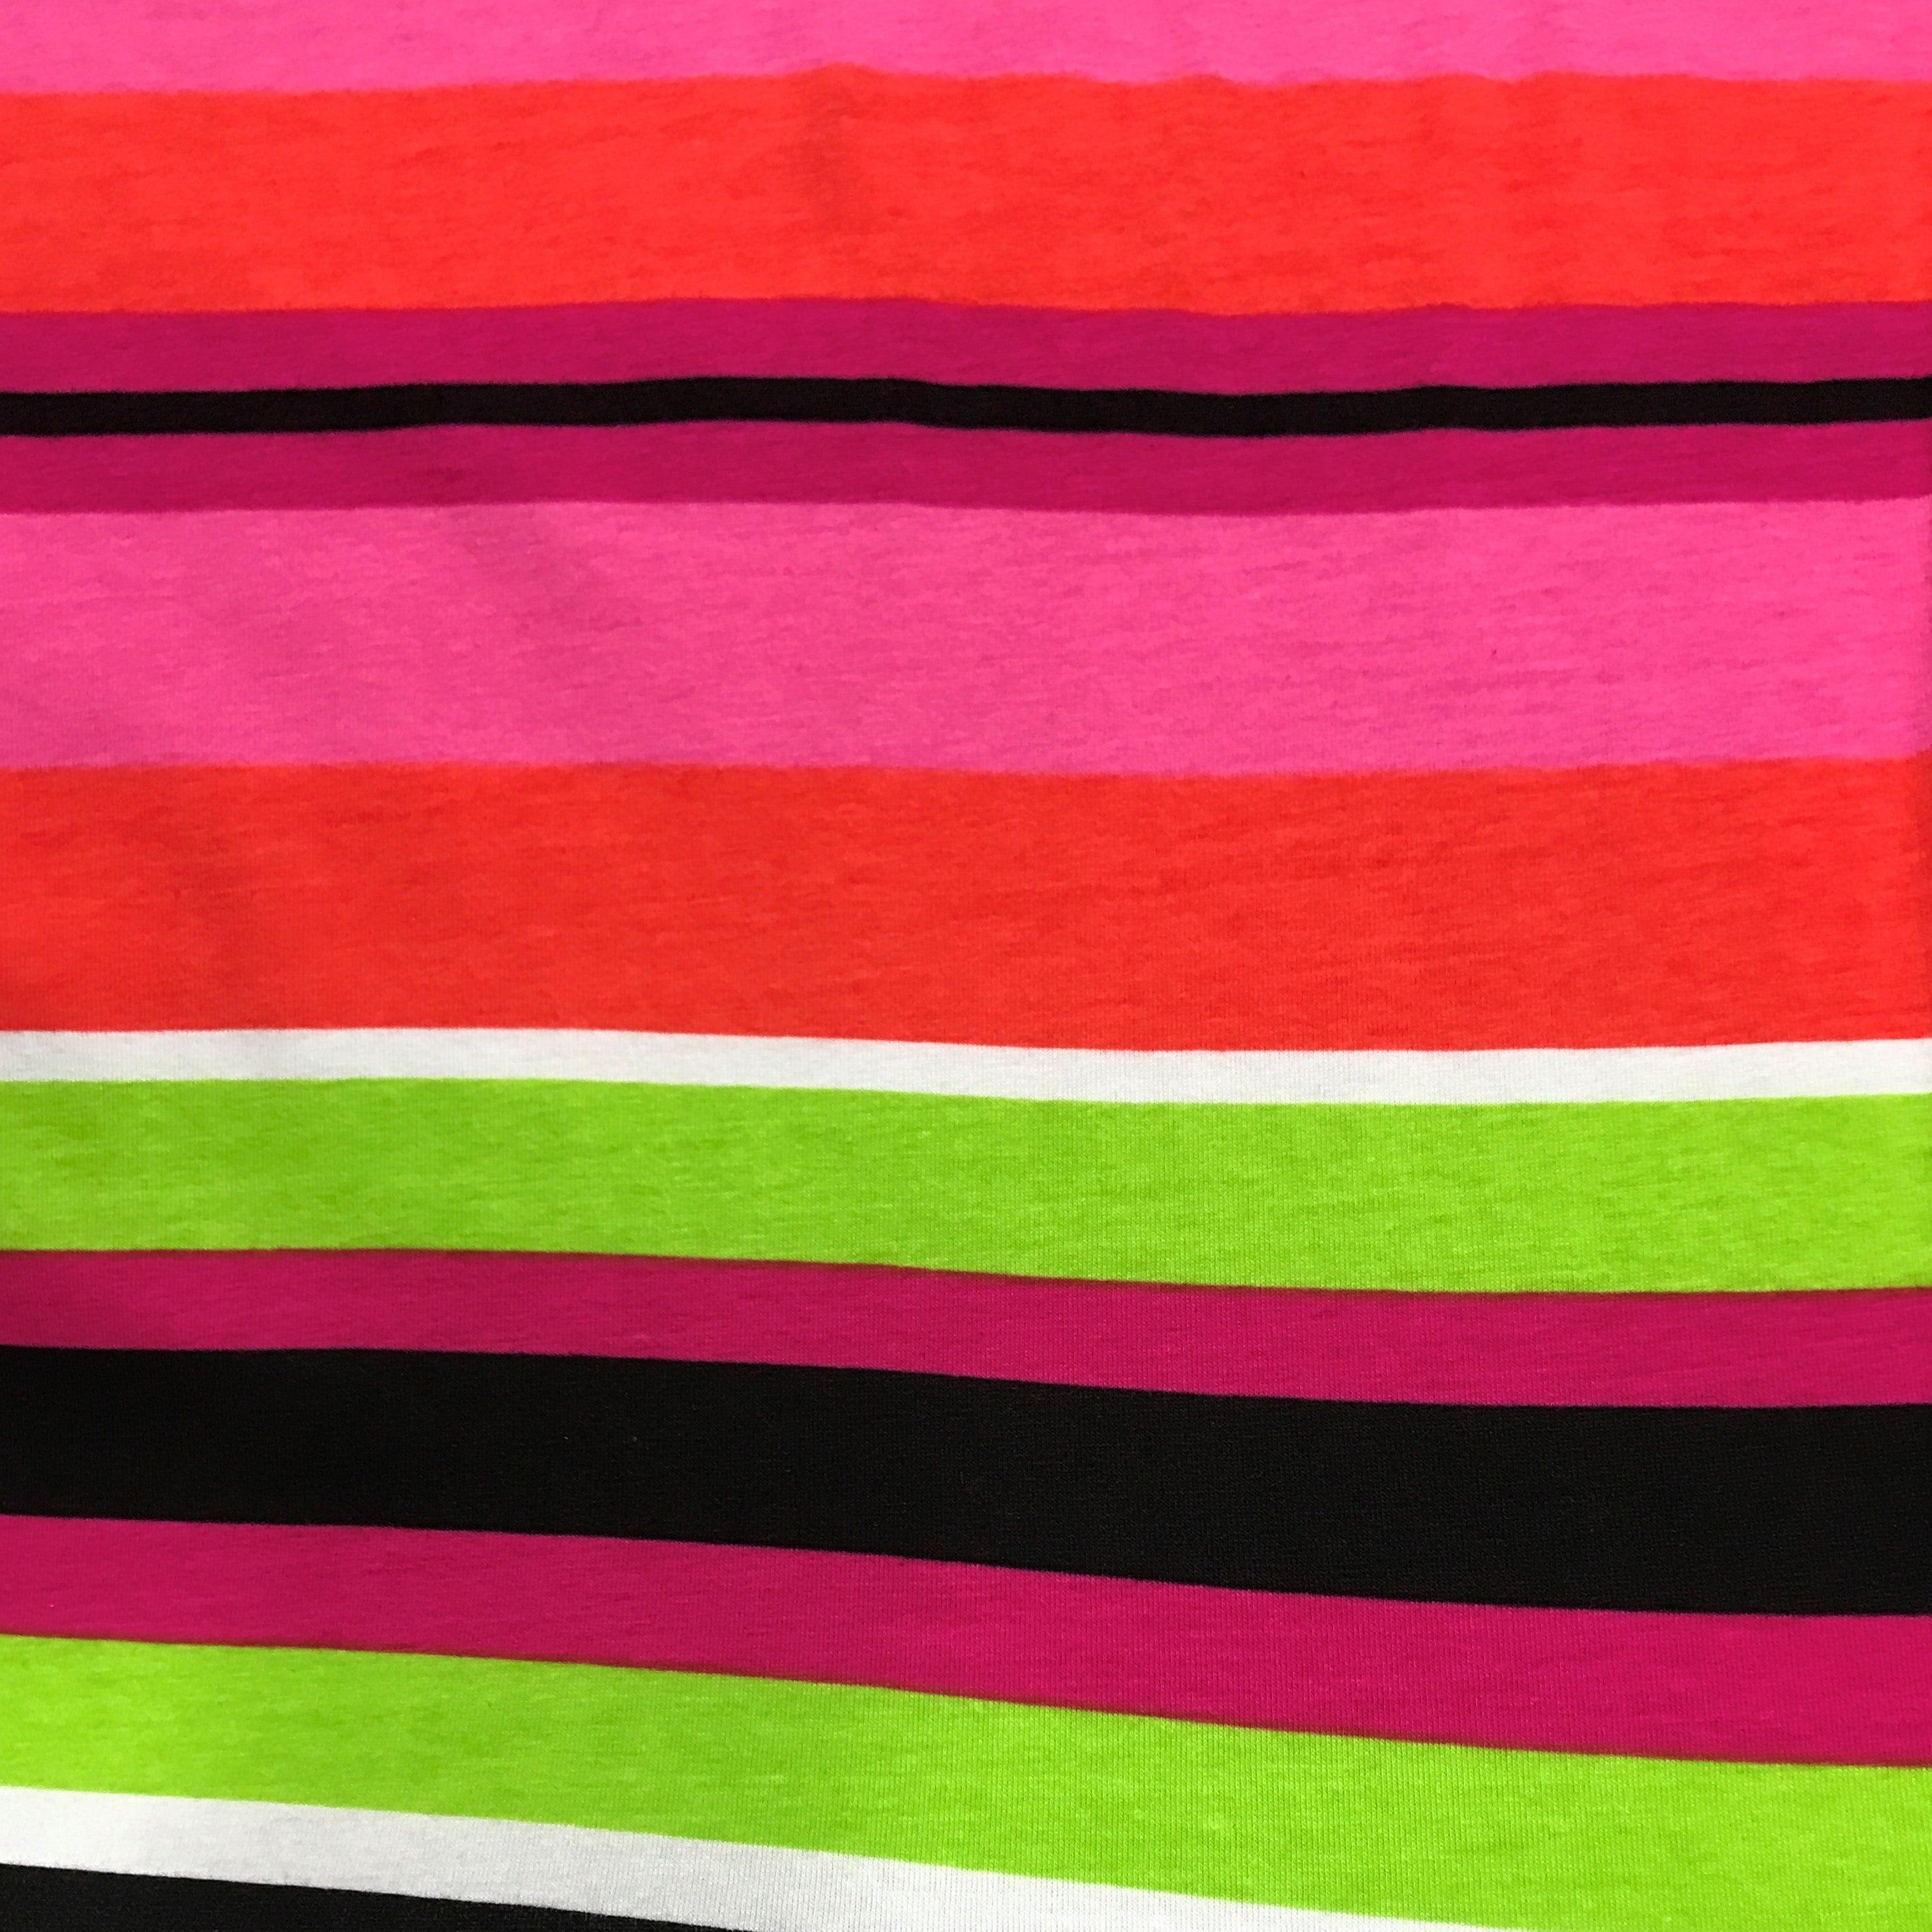 Pink, Green, White and Black Stripes on Cotton/Spandex Jersey Fabric ...